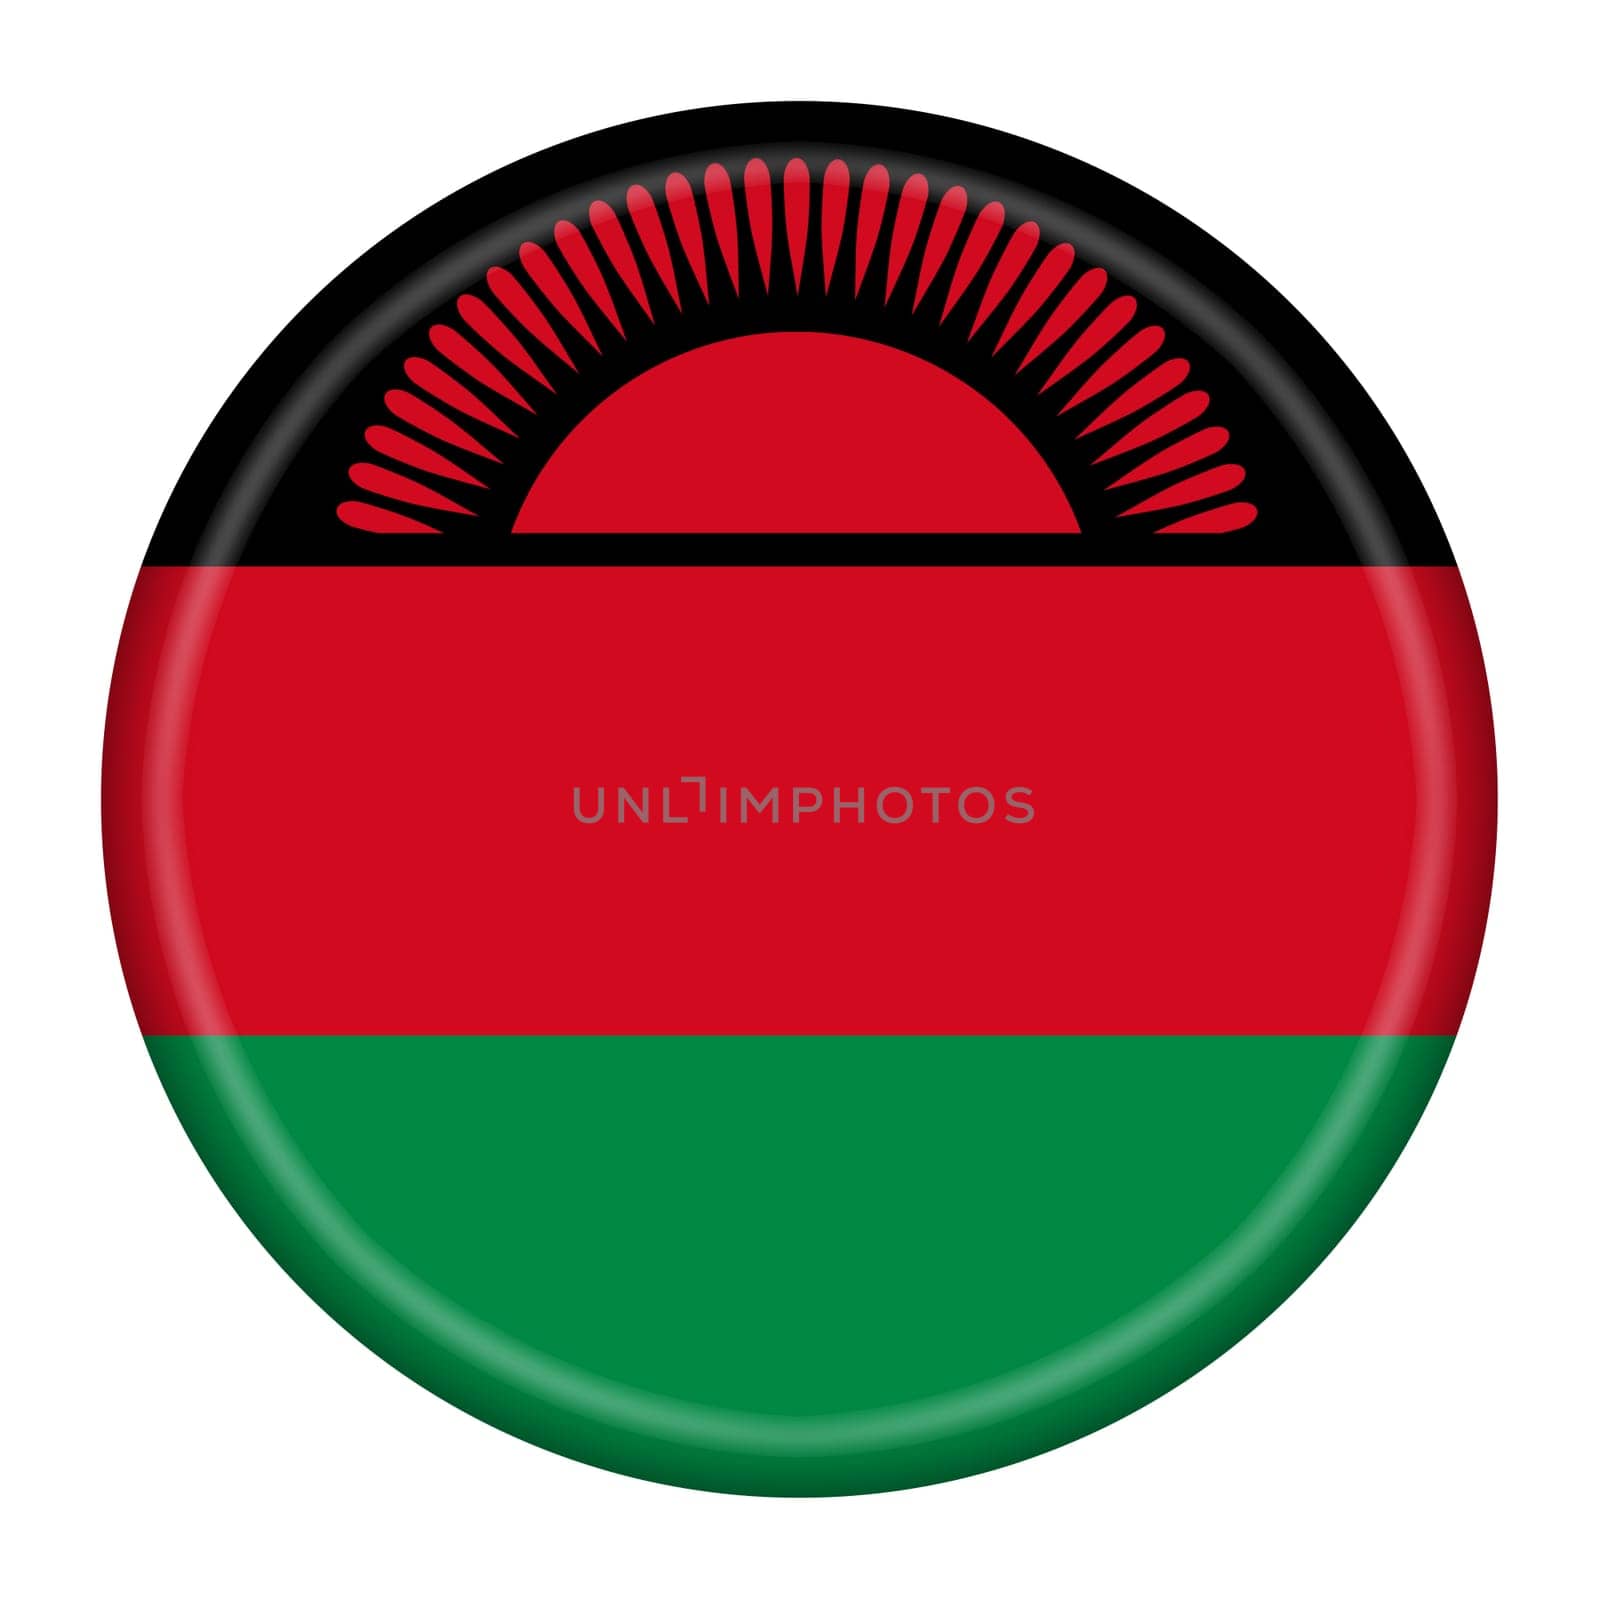 A Malawi flag button 3d illustration with clipping path rising sun red green black